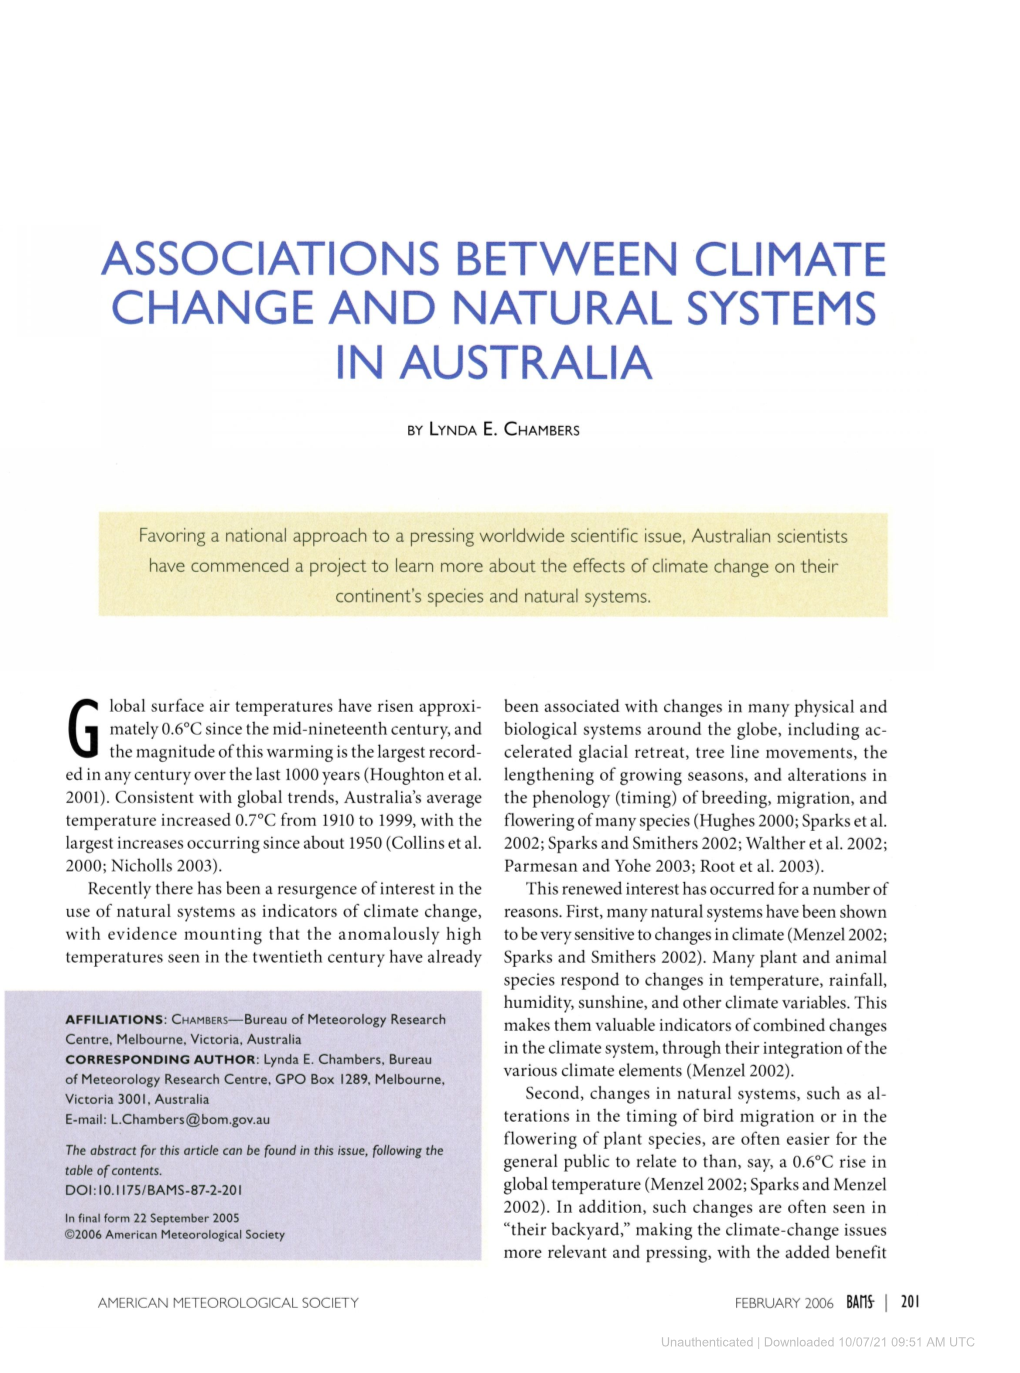 Associations Between Climate Change and Natural Systems in Australia